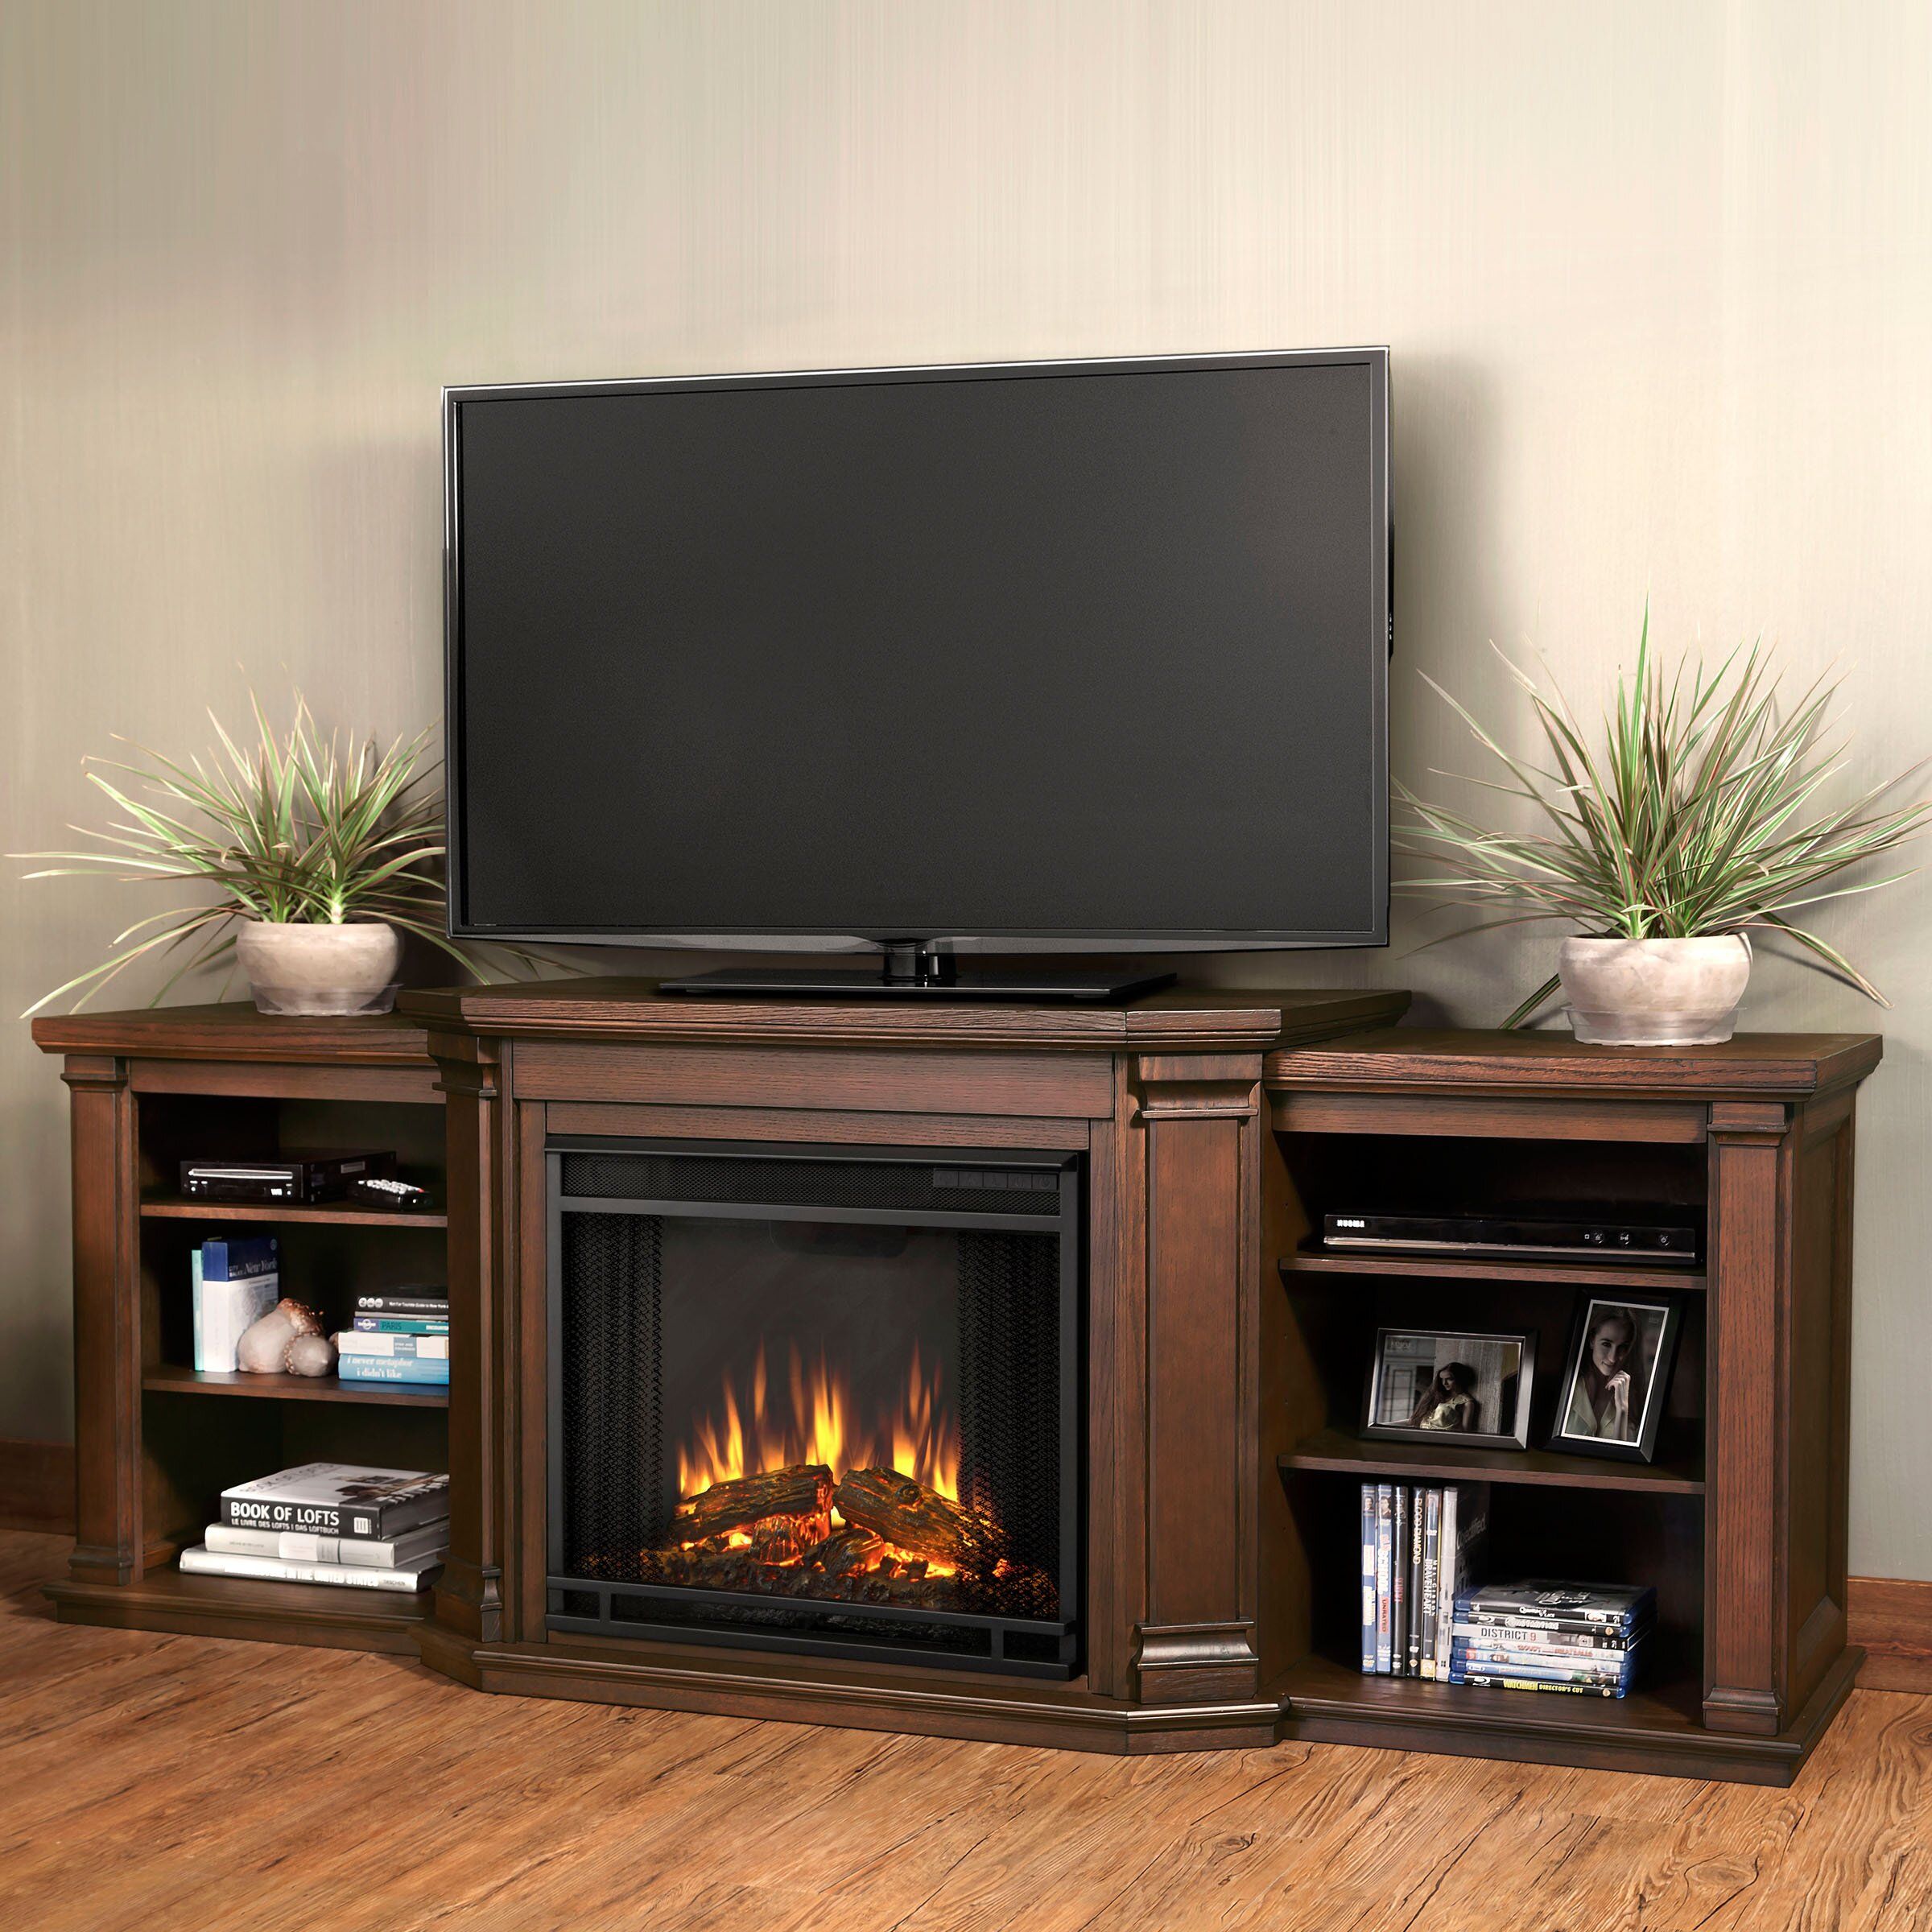 Real Flame Valmont Tv Stand With Electric Fireplace & Reviews | Wayfair Inside Electric Fireplace Tv Stands (Gallery 1 of 20)